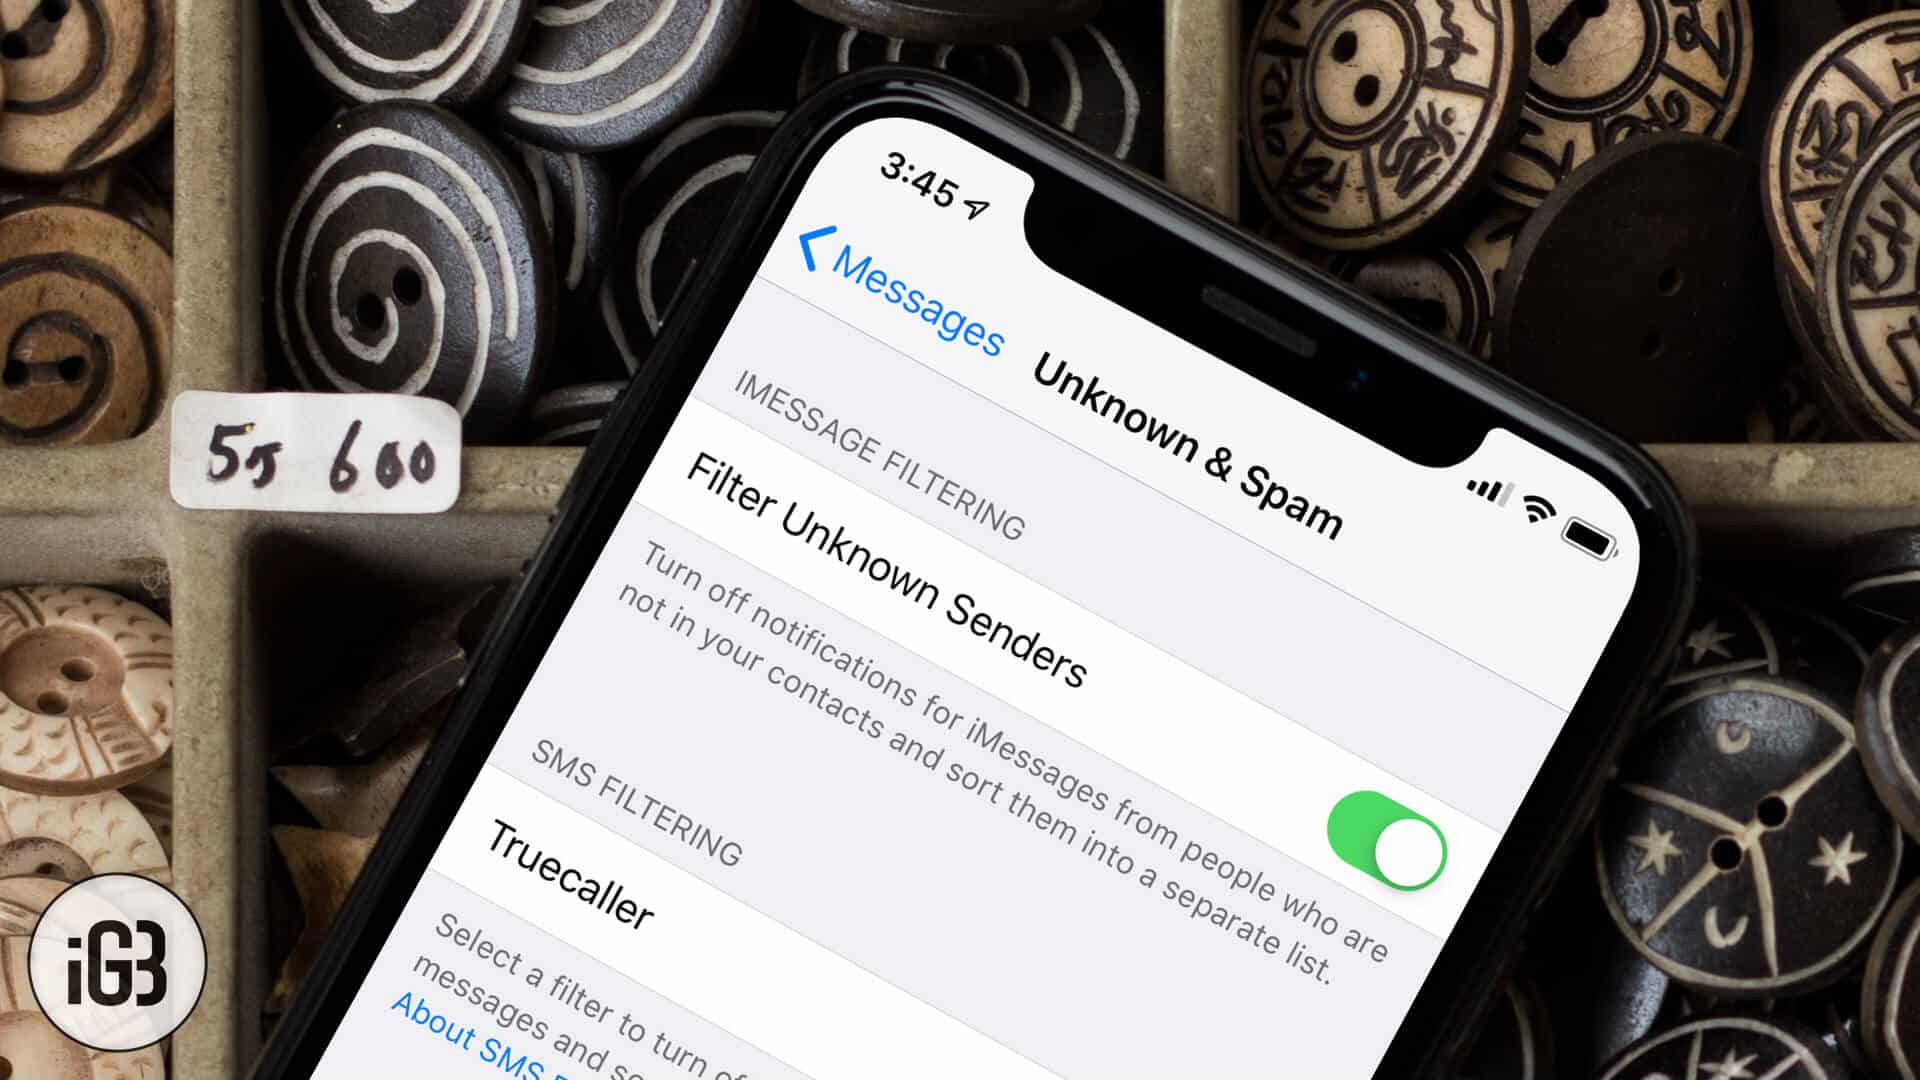 How to filter imessages from unknown senders on iphone or ipad